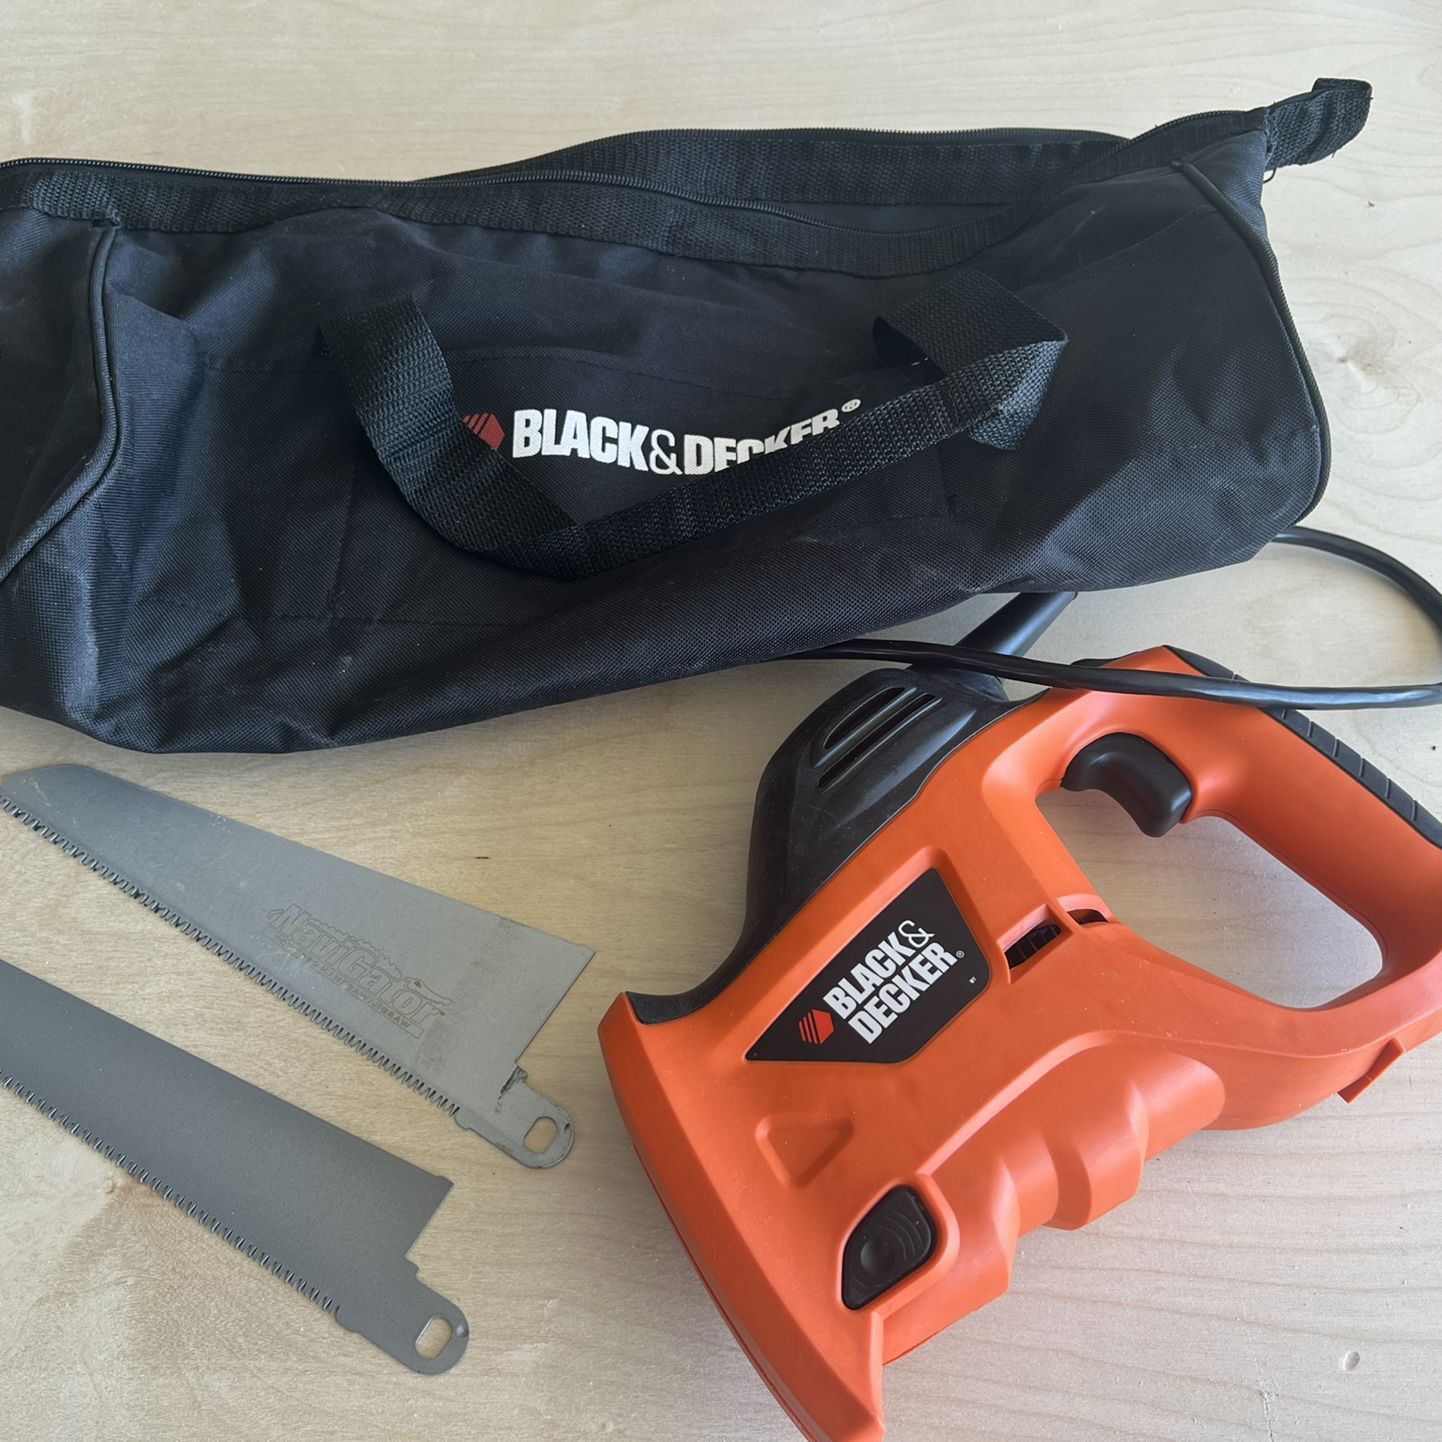 BLACK+DECKER Electric Hand Saw with Storage Bag, 3.4-Amp for Sale